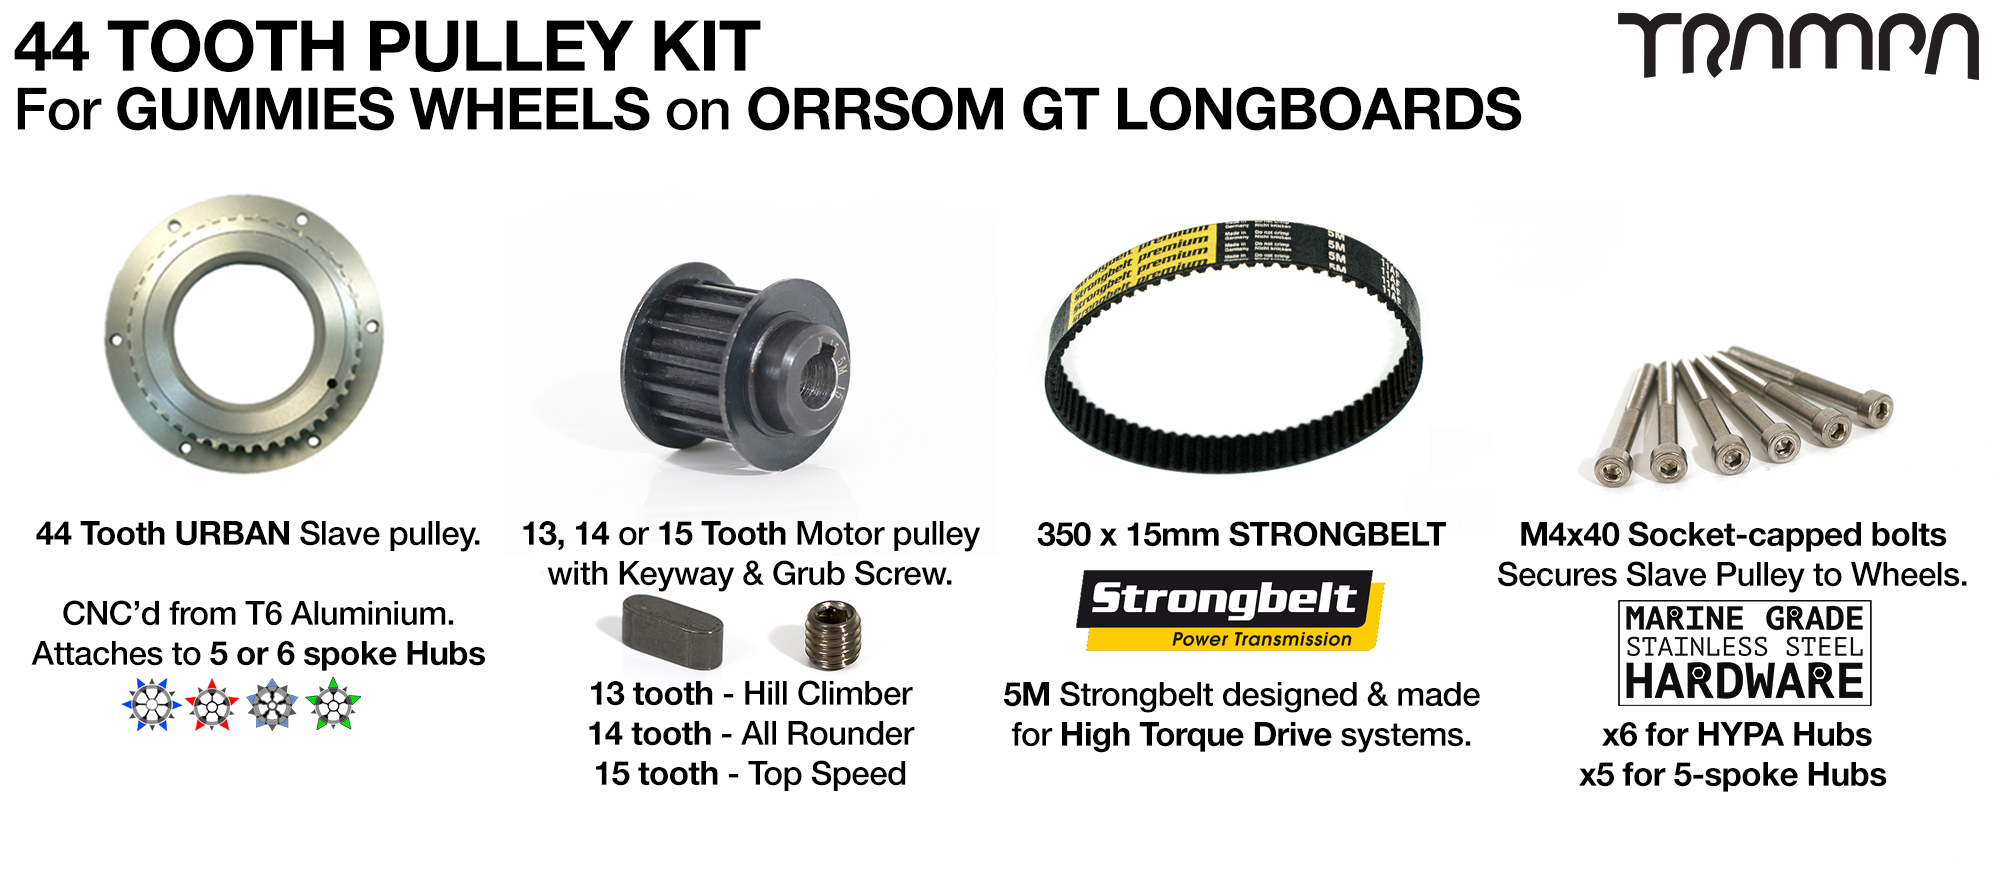 ORRSOM GT Longboard Pulley kit with 44 Tooth Slave & 350mm x 15mm Belt to fit 5 Inch GUMMIES Tyres on 14FiFties Trucks